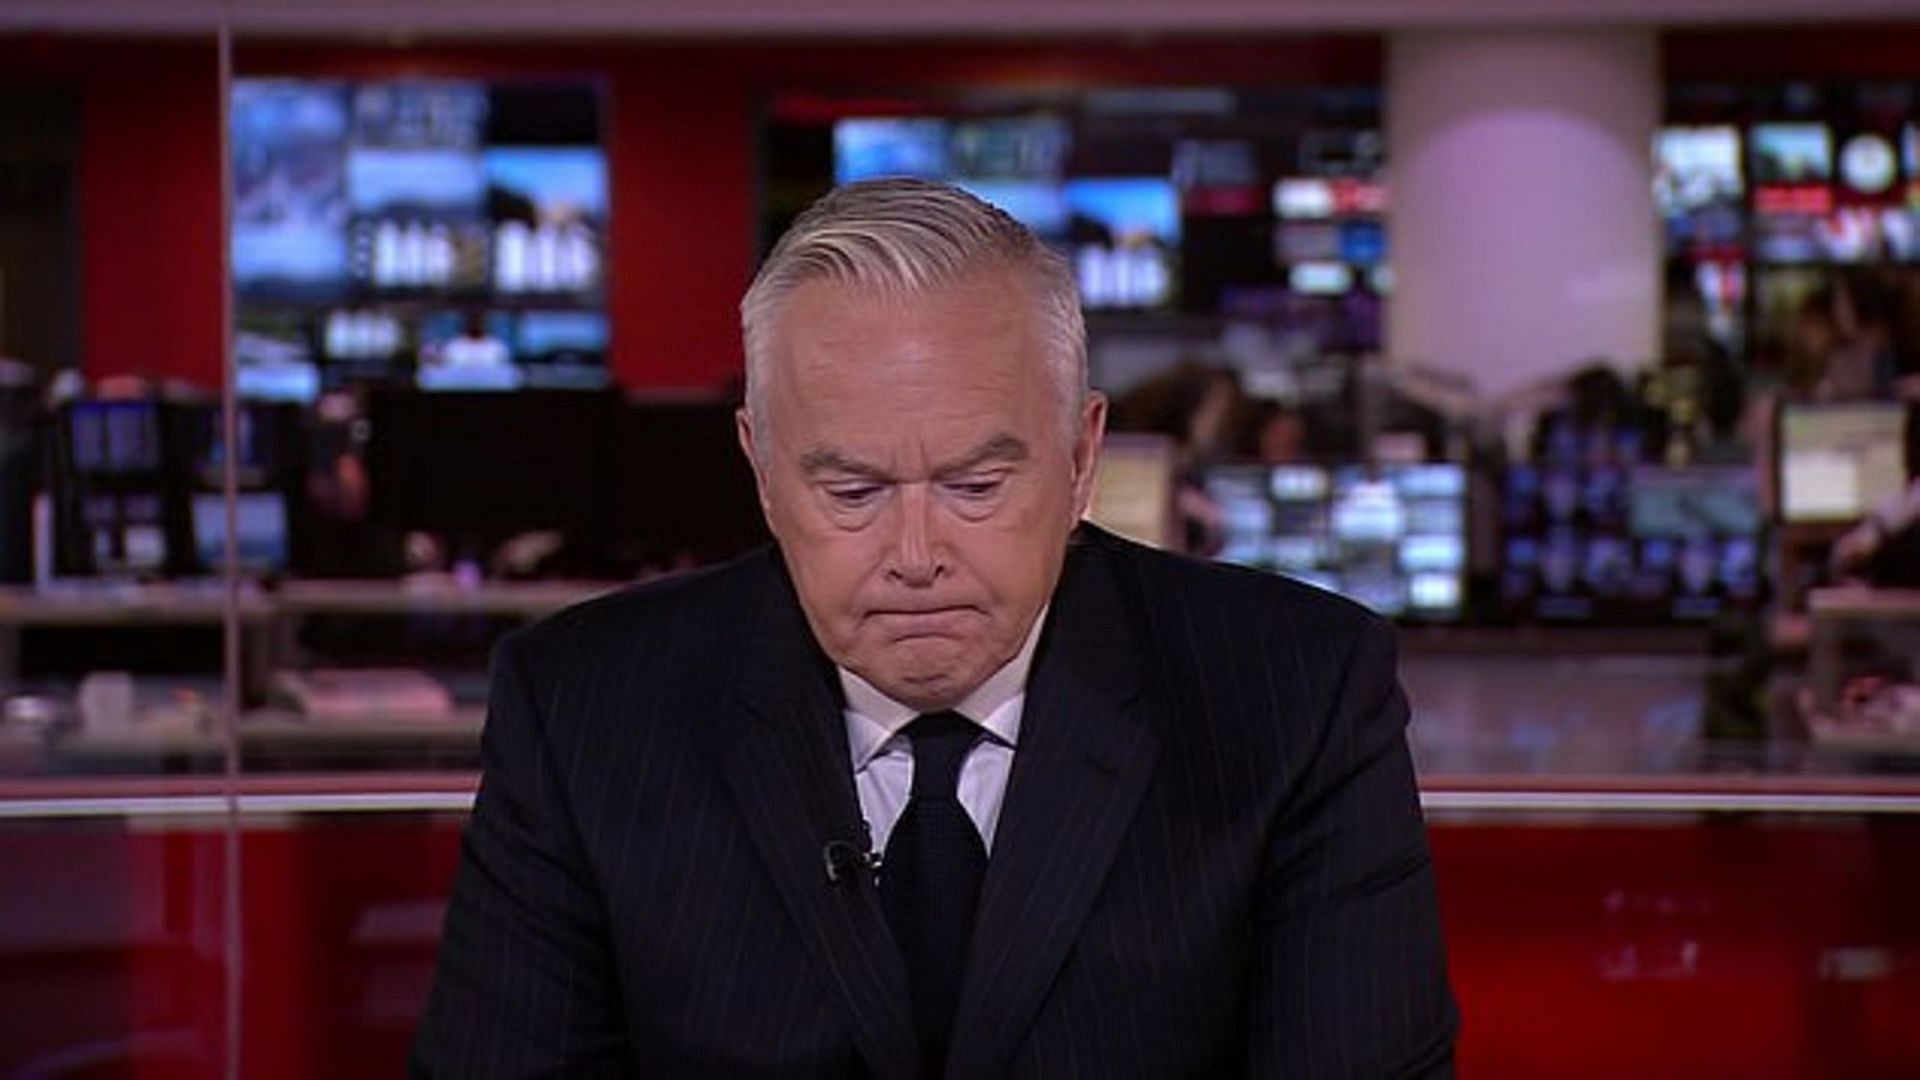 BBC presenter Huw Edwards comes under fire amidst Snapchat scandal (Image via BBC News)